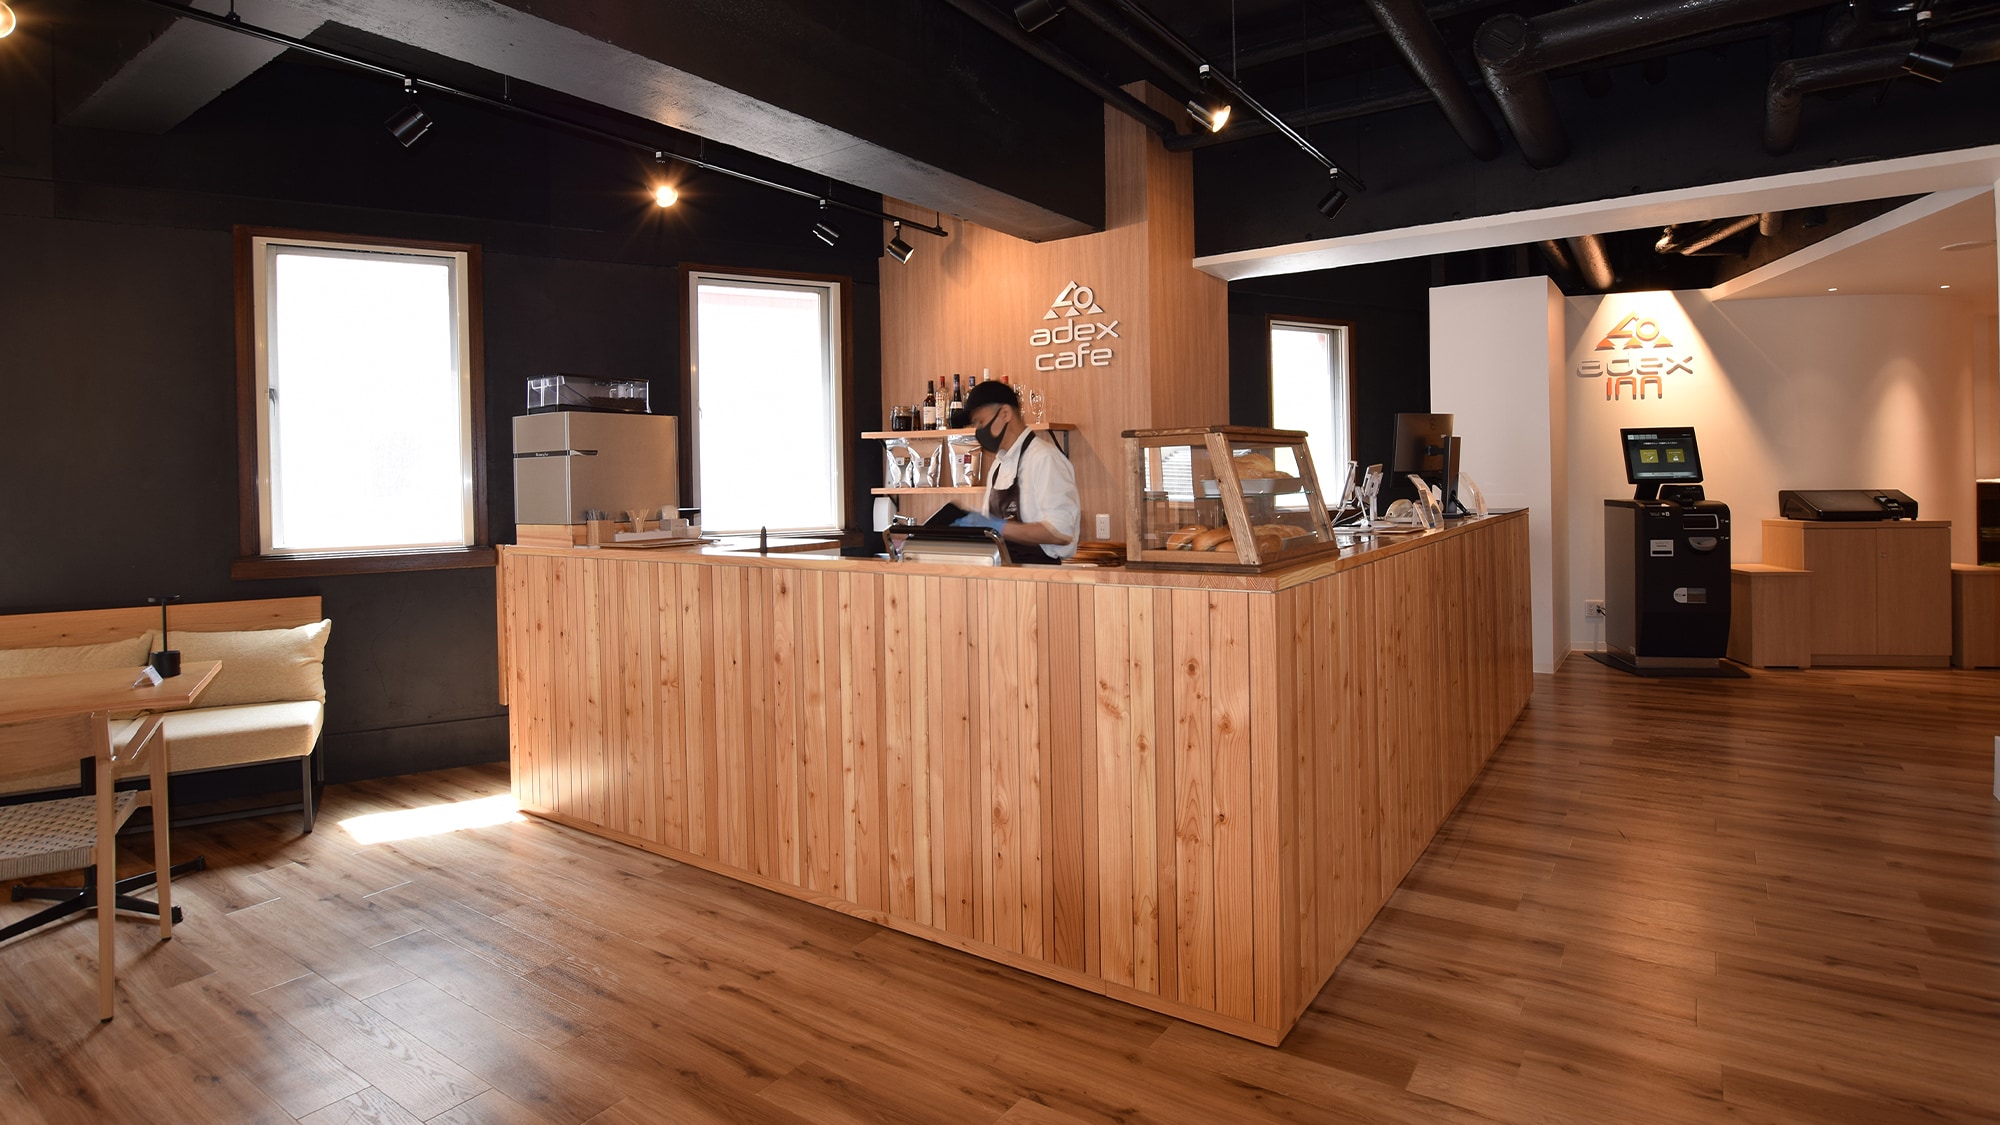 There is also Noboribetsu Onsen's first all-day cafe. We have freshly baked bread and various drinks [adex cafe]